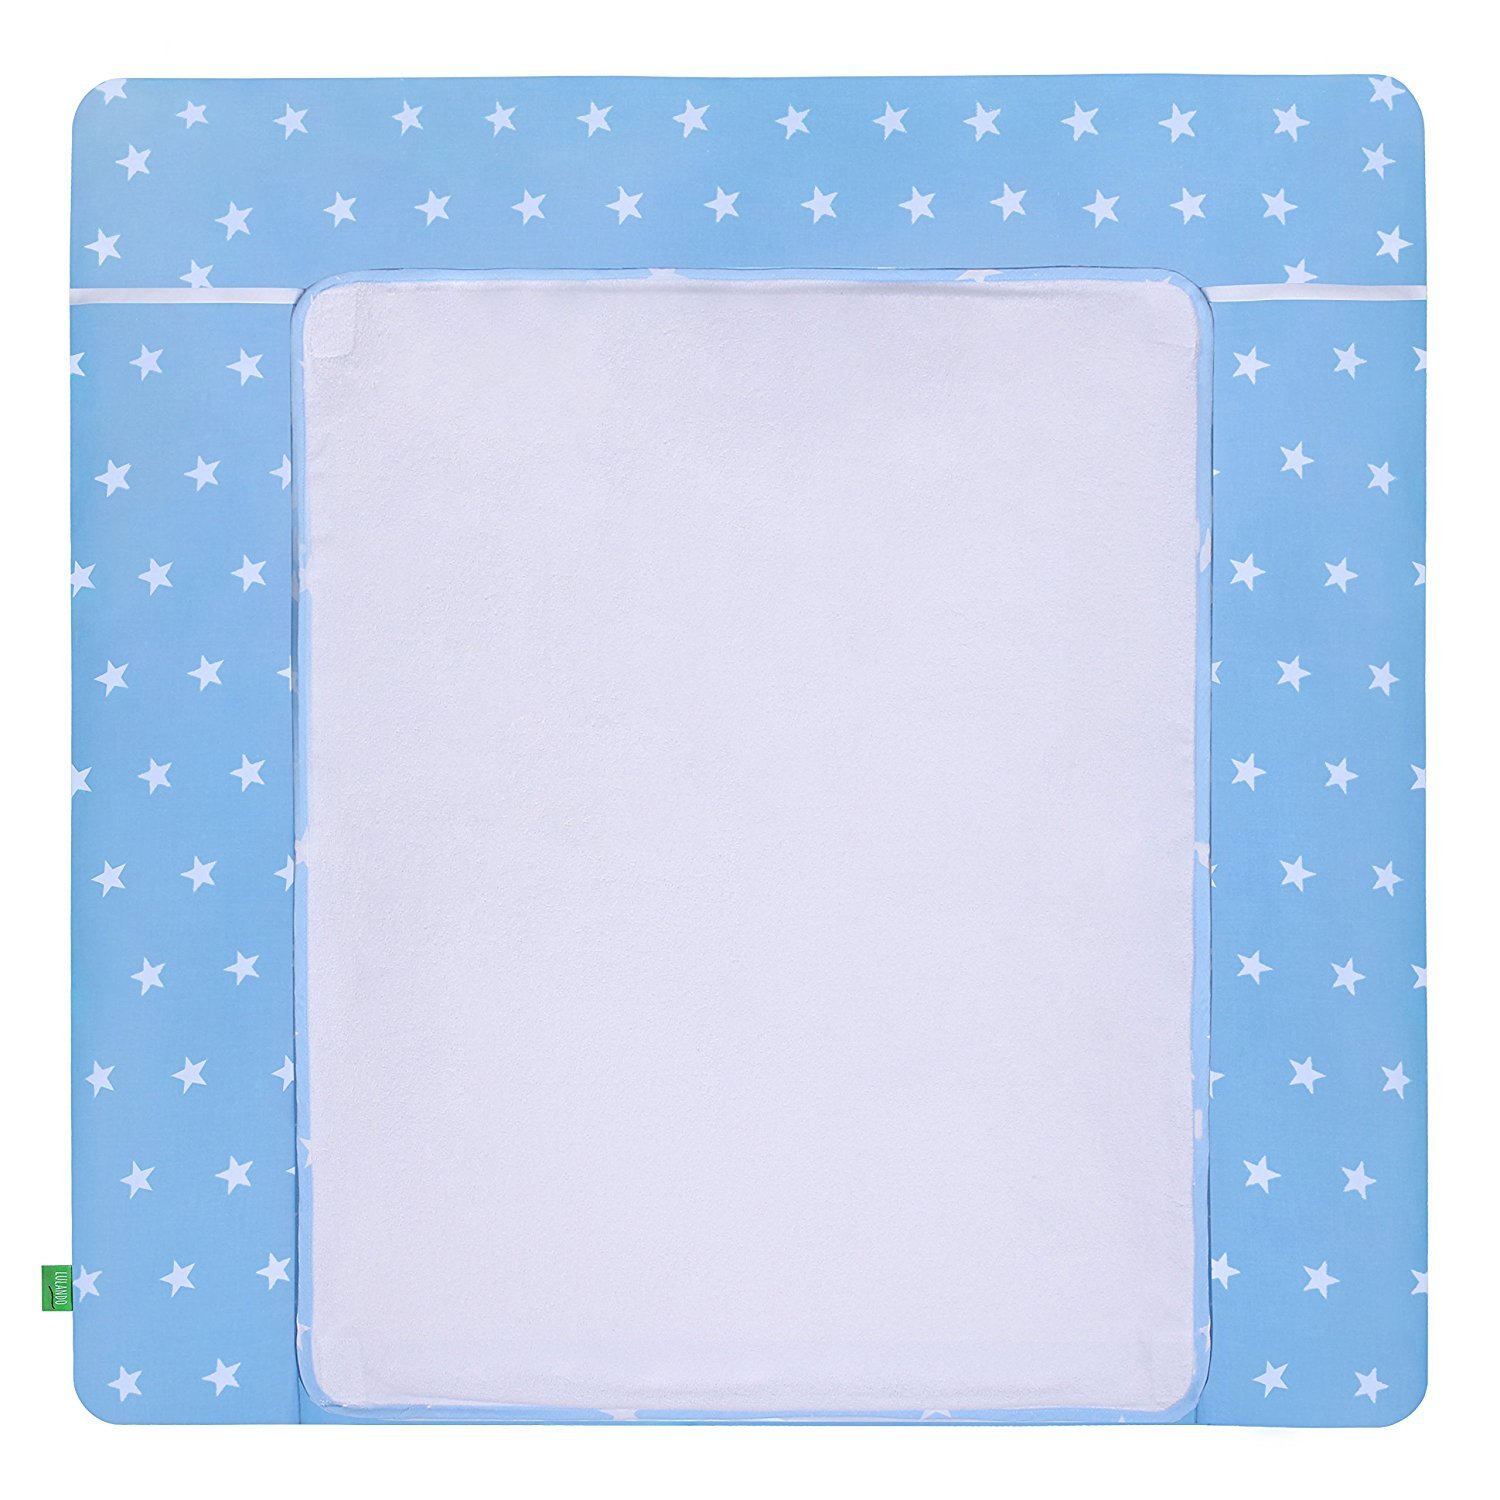 Lulando Changing Mat with 2 Removable Waterproof Covers - Outer Material 100% Cotton - Suitable for the IKEA Malm or Hemnes Units